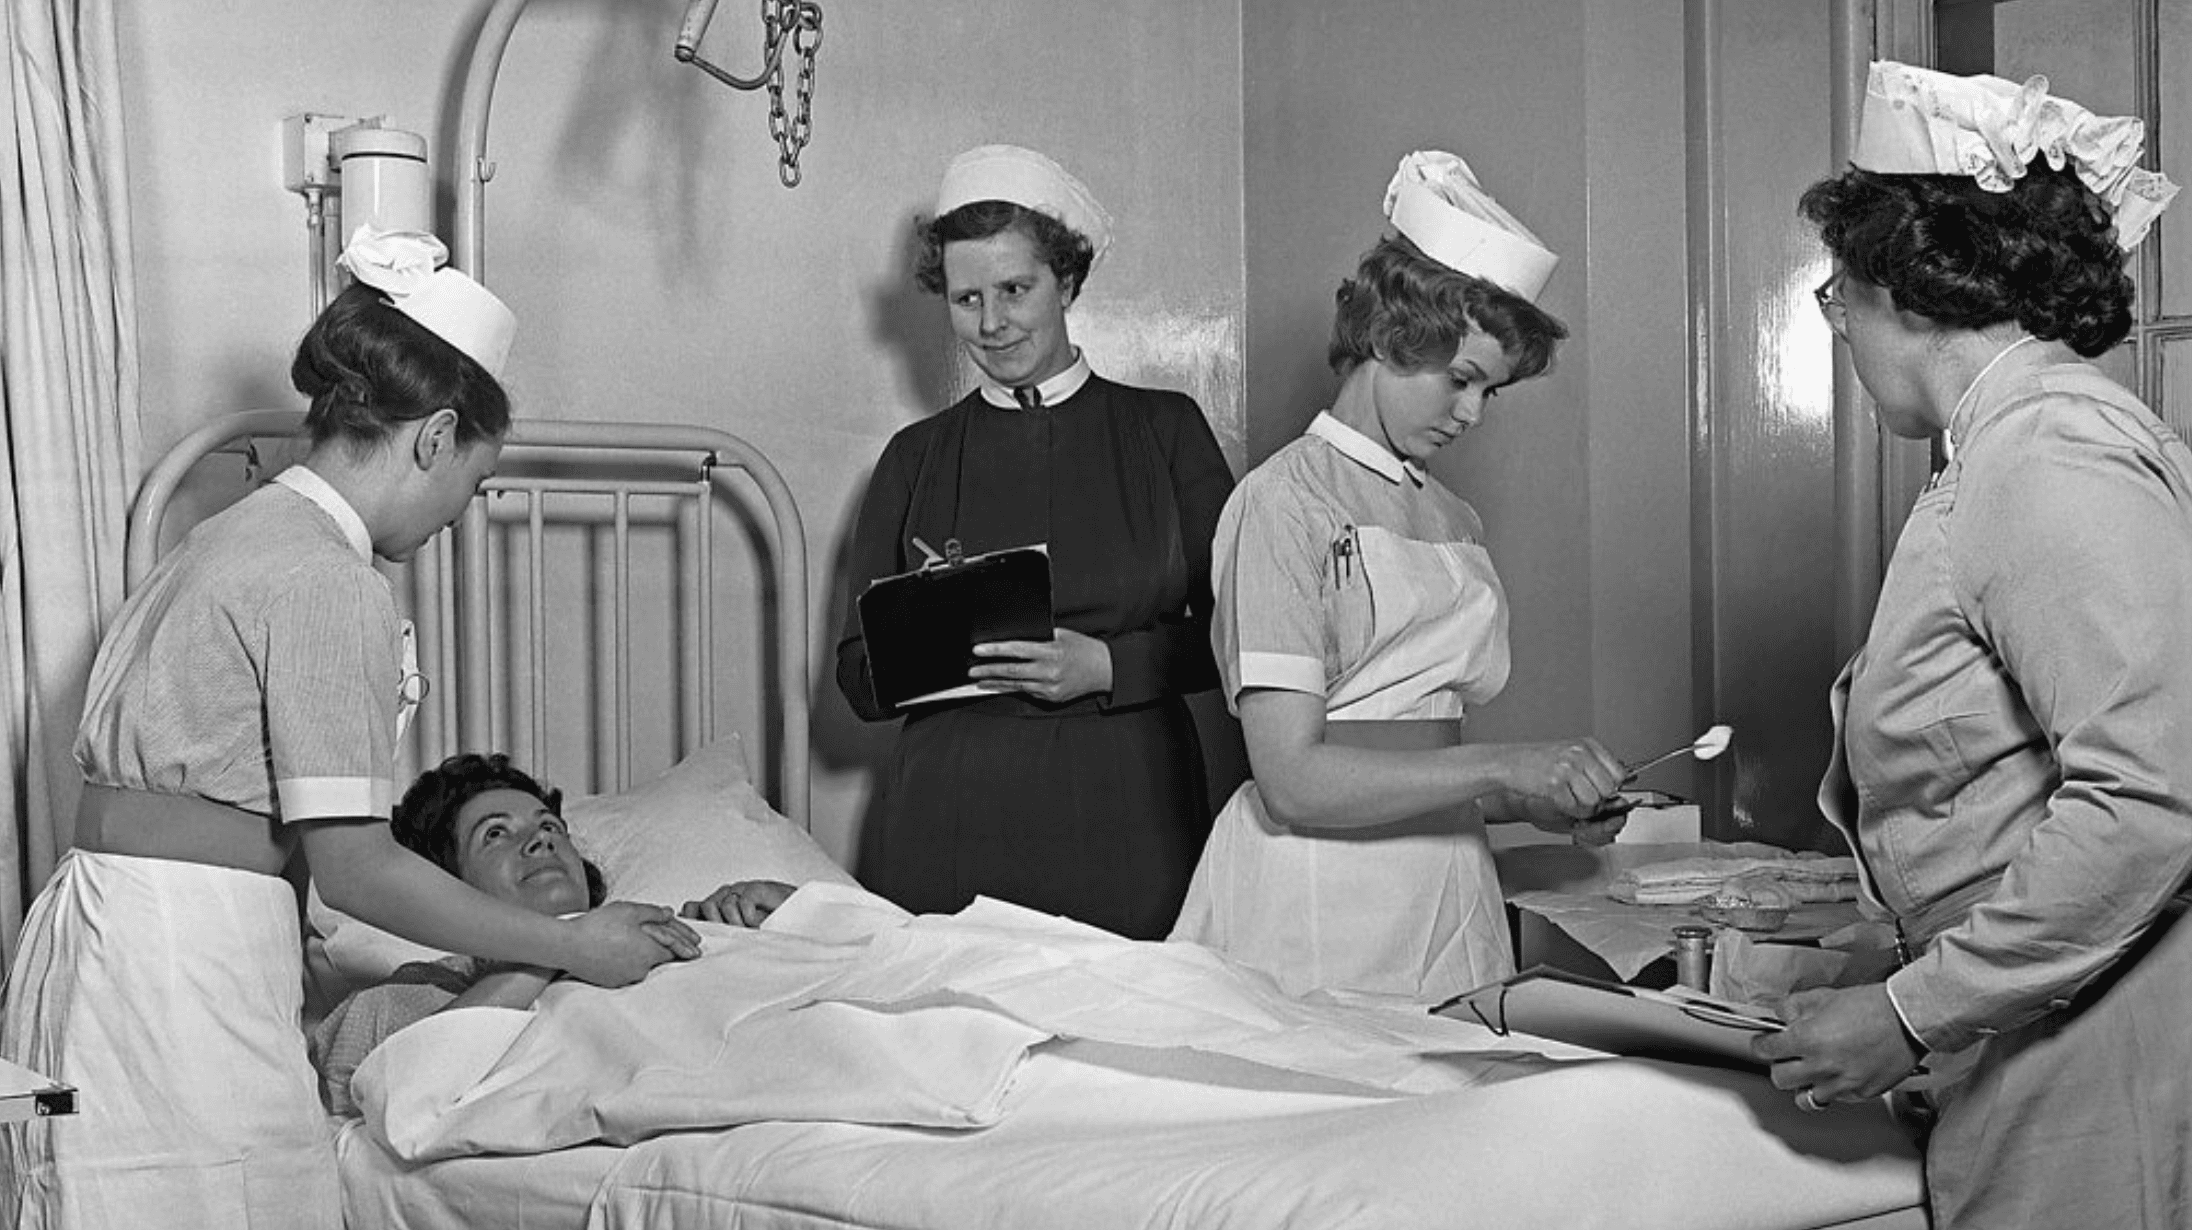 THE WAY WE WERE: The NHS has come a long way – but the Tories are trying to end its journey